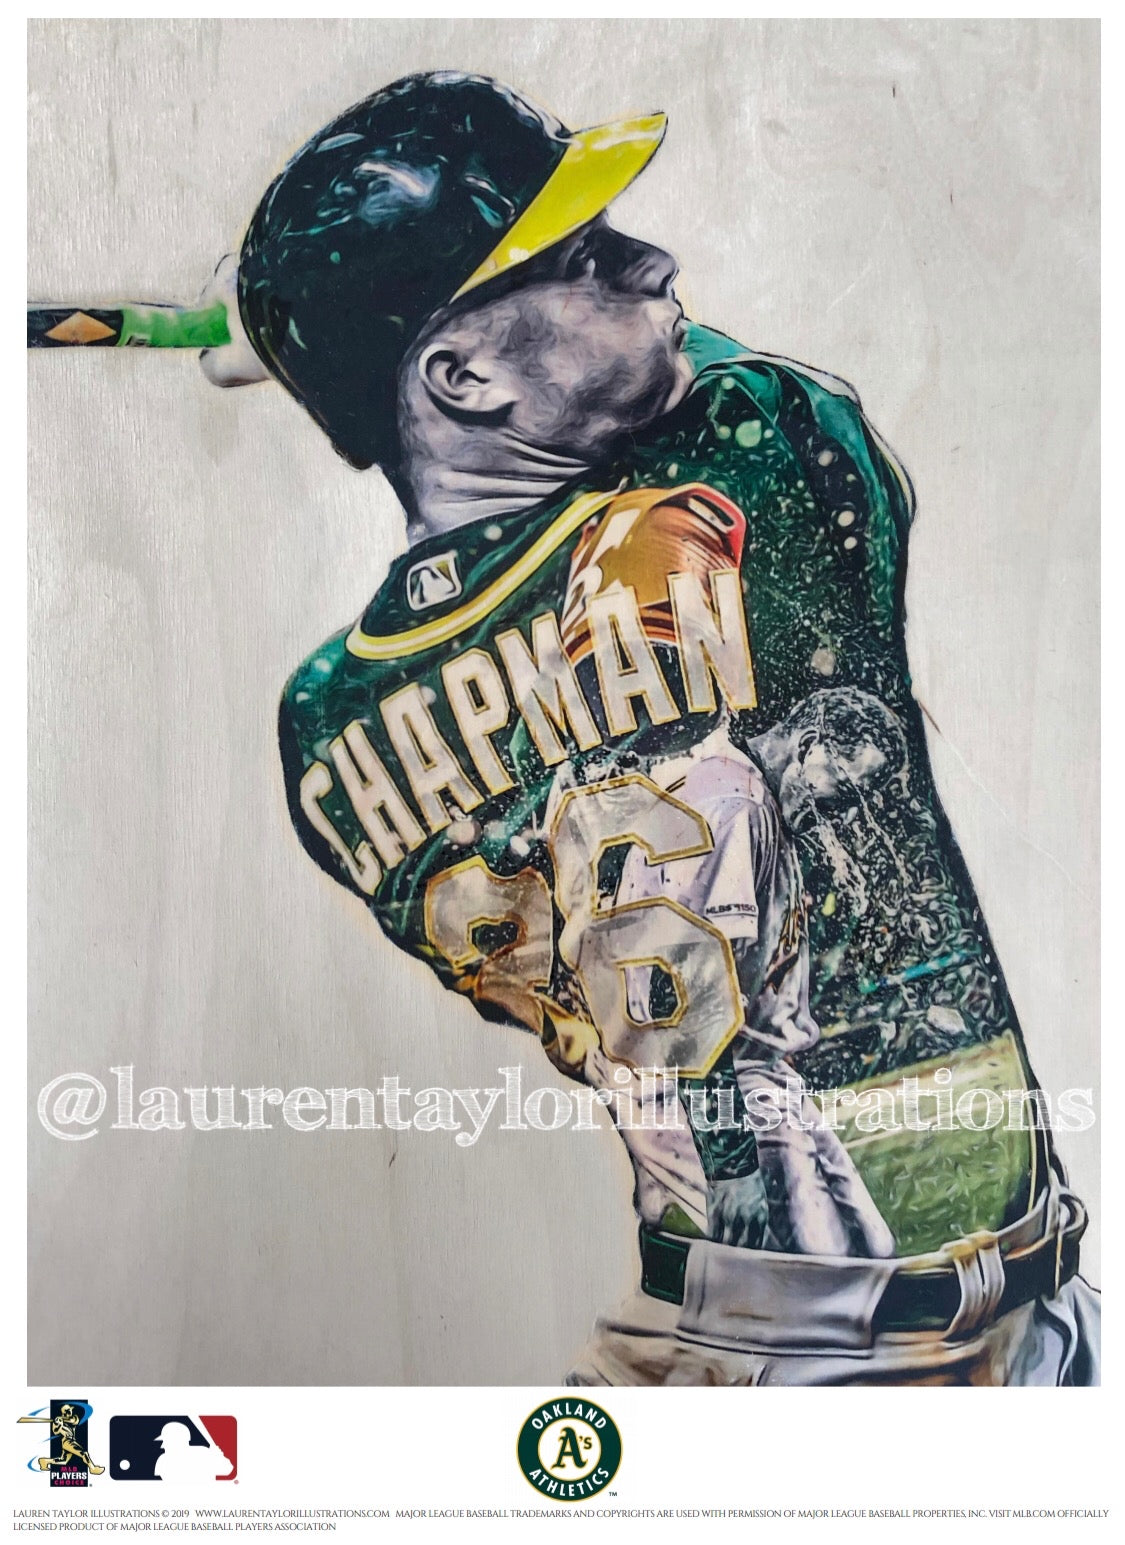 "Chappy" (Matt Chapman) - Officially Licensed MLB Print - Limited Release